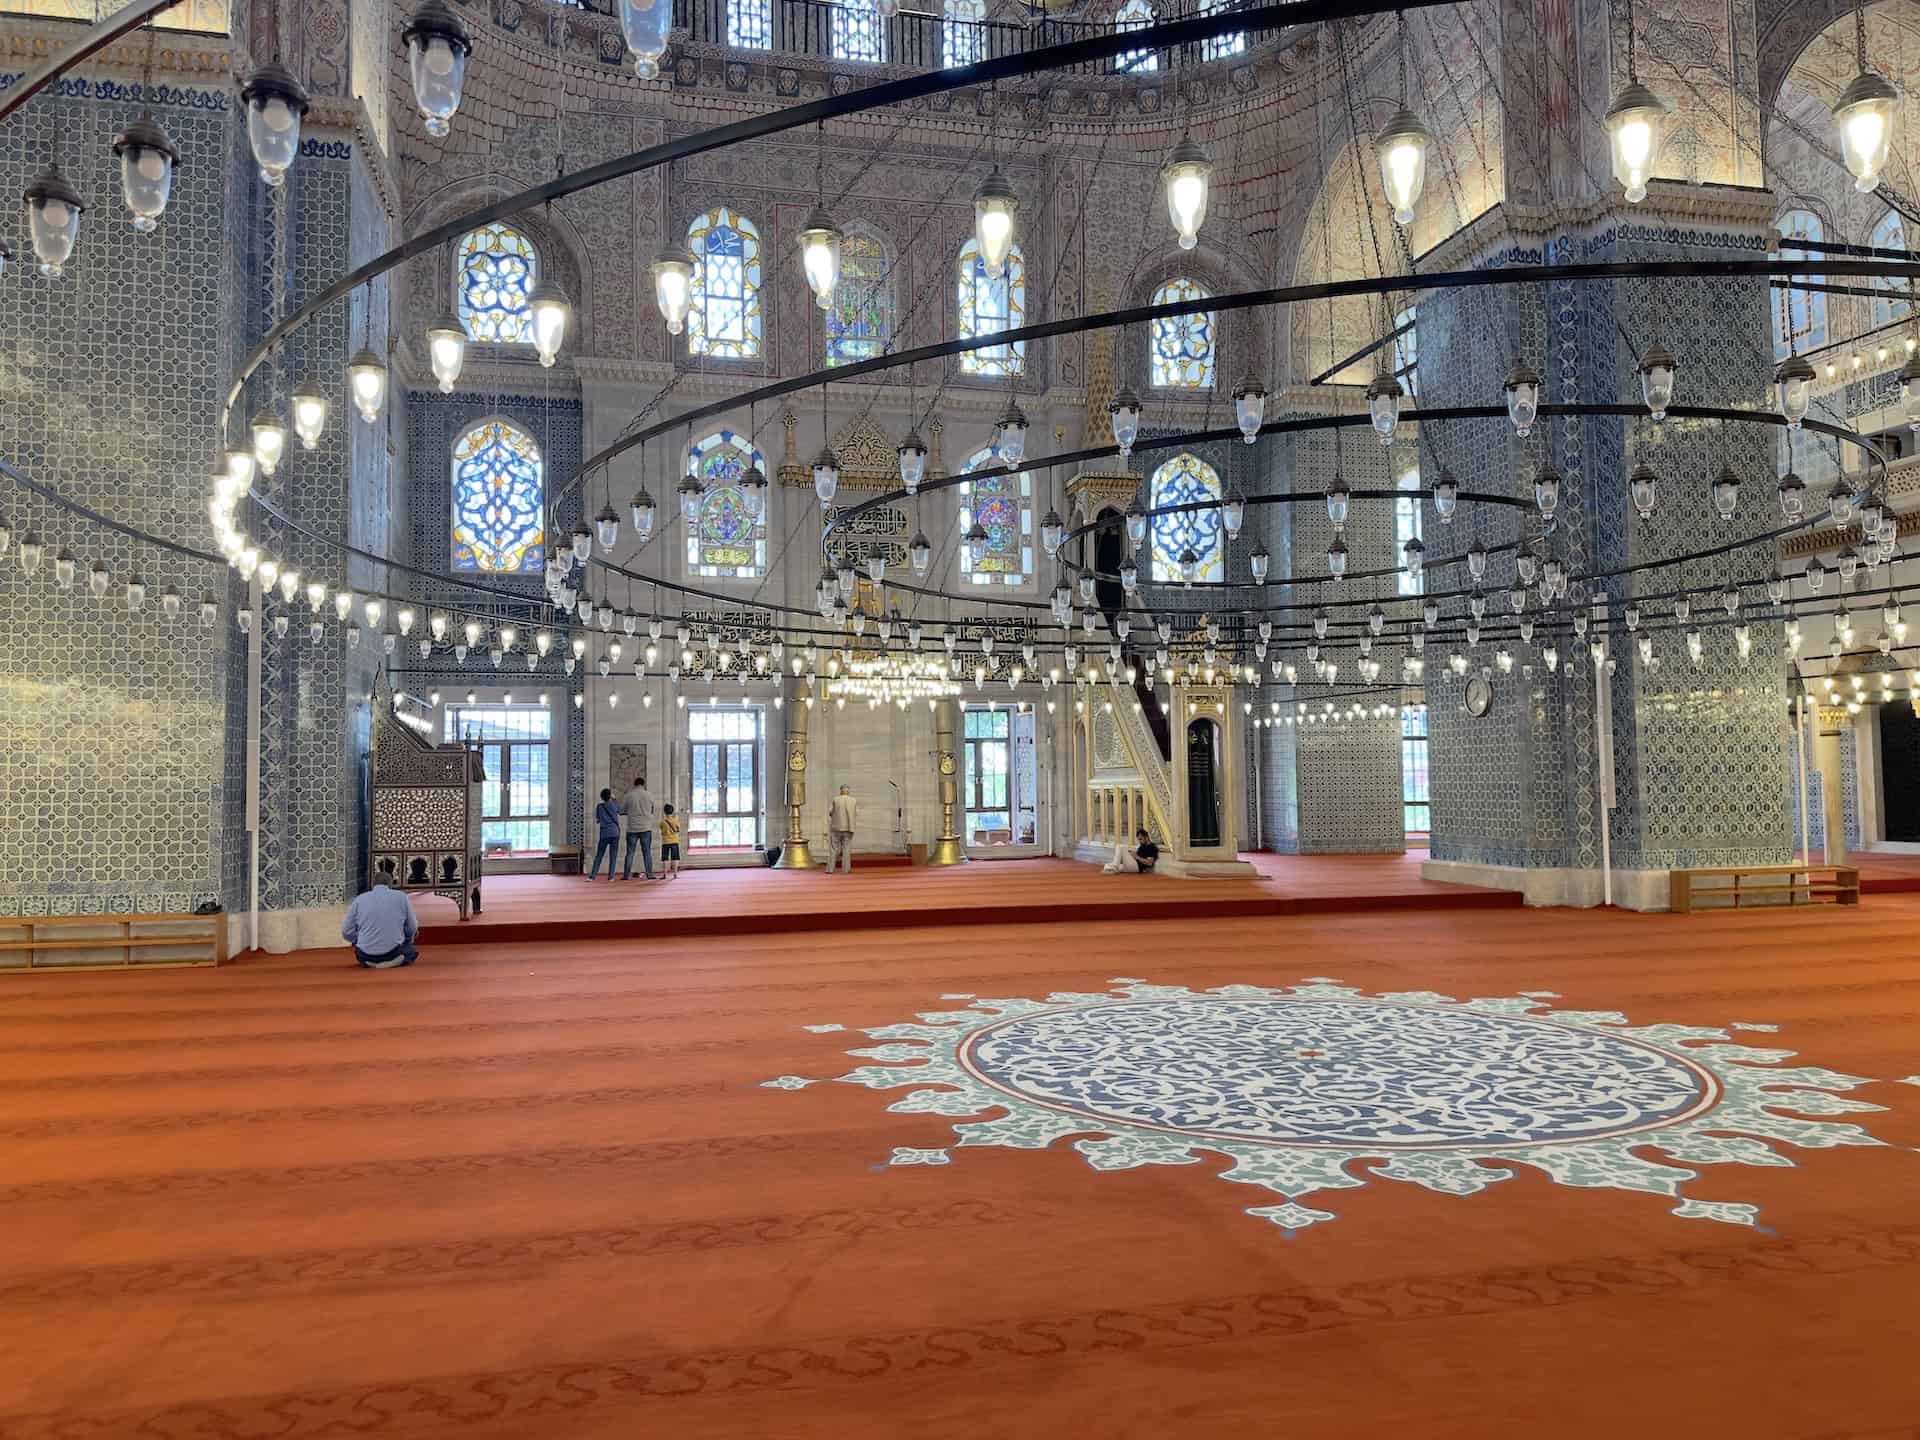 Prayer hall at the New Mosque in Istanbul, Turkey